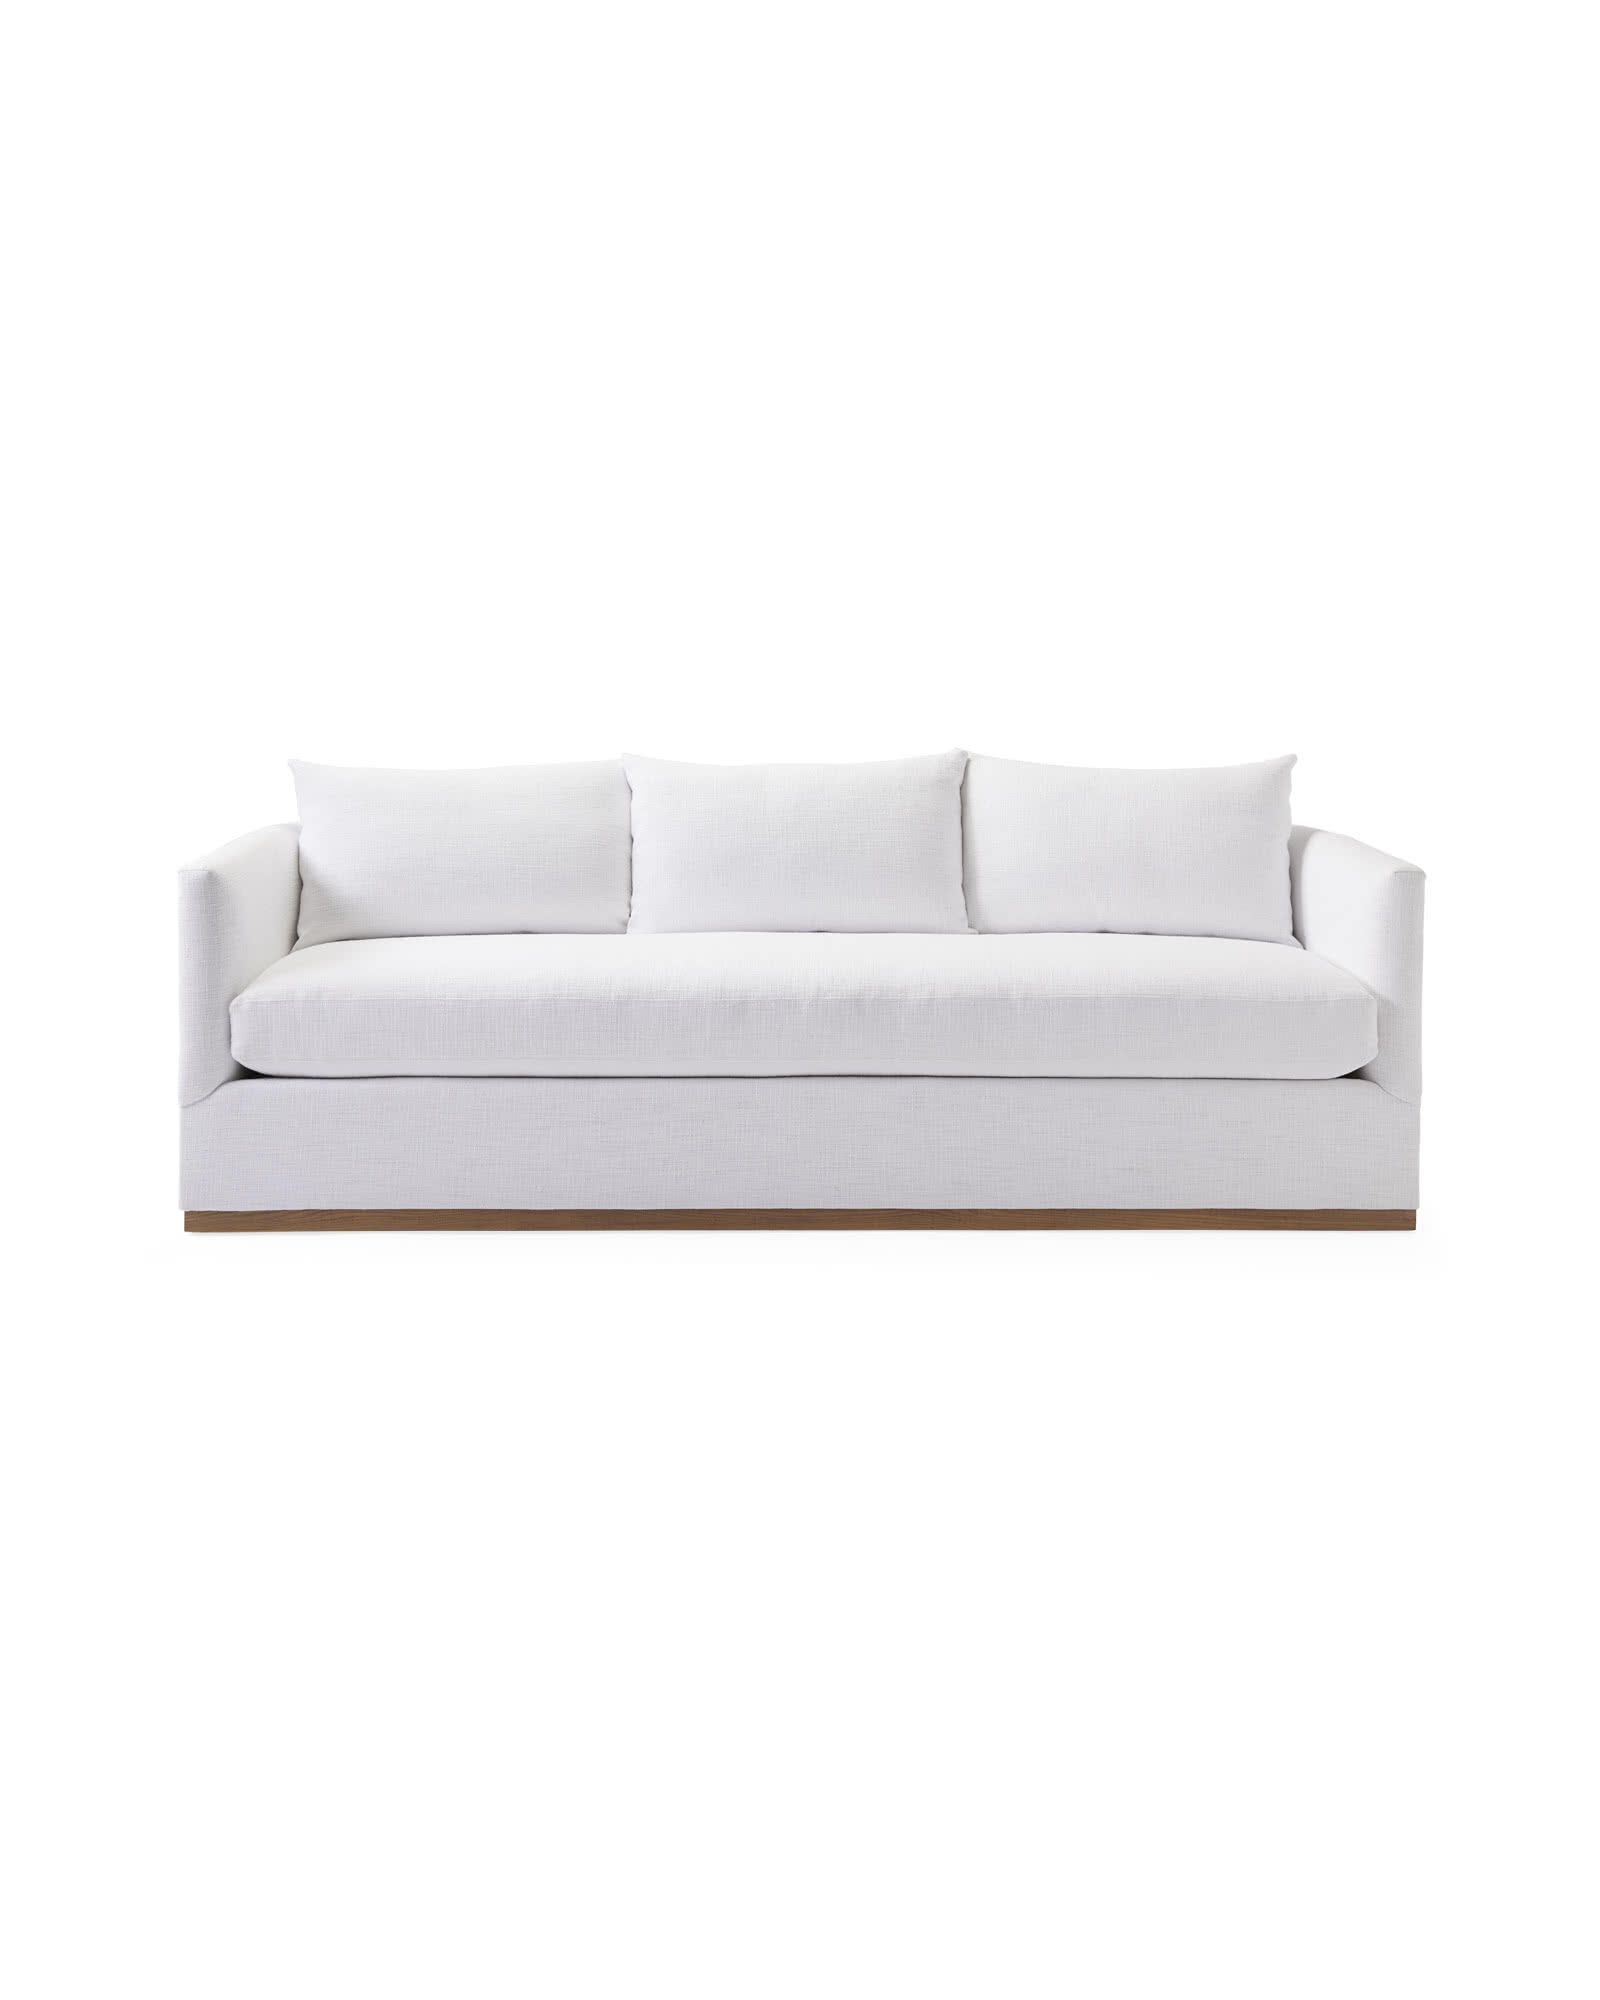 Parkwood Sofa | Serena and Lily